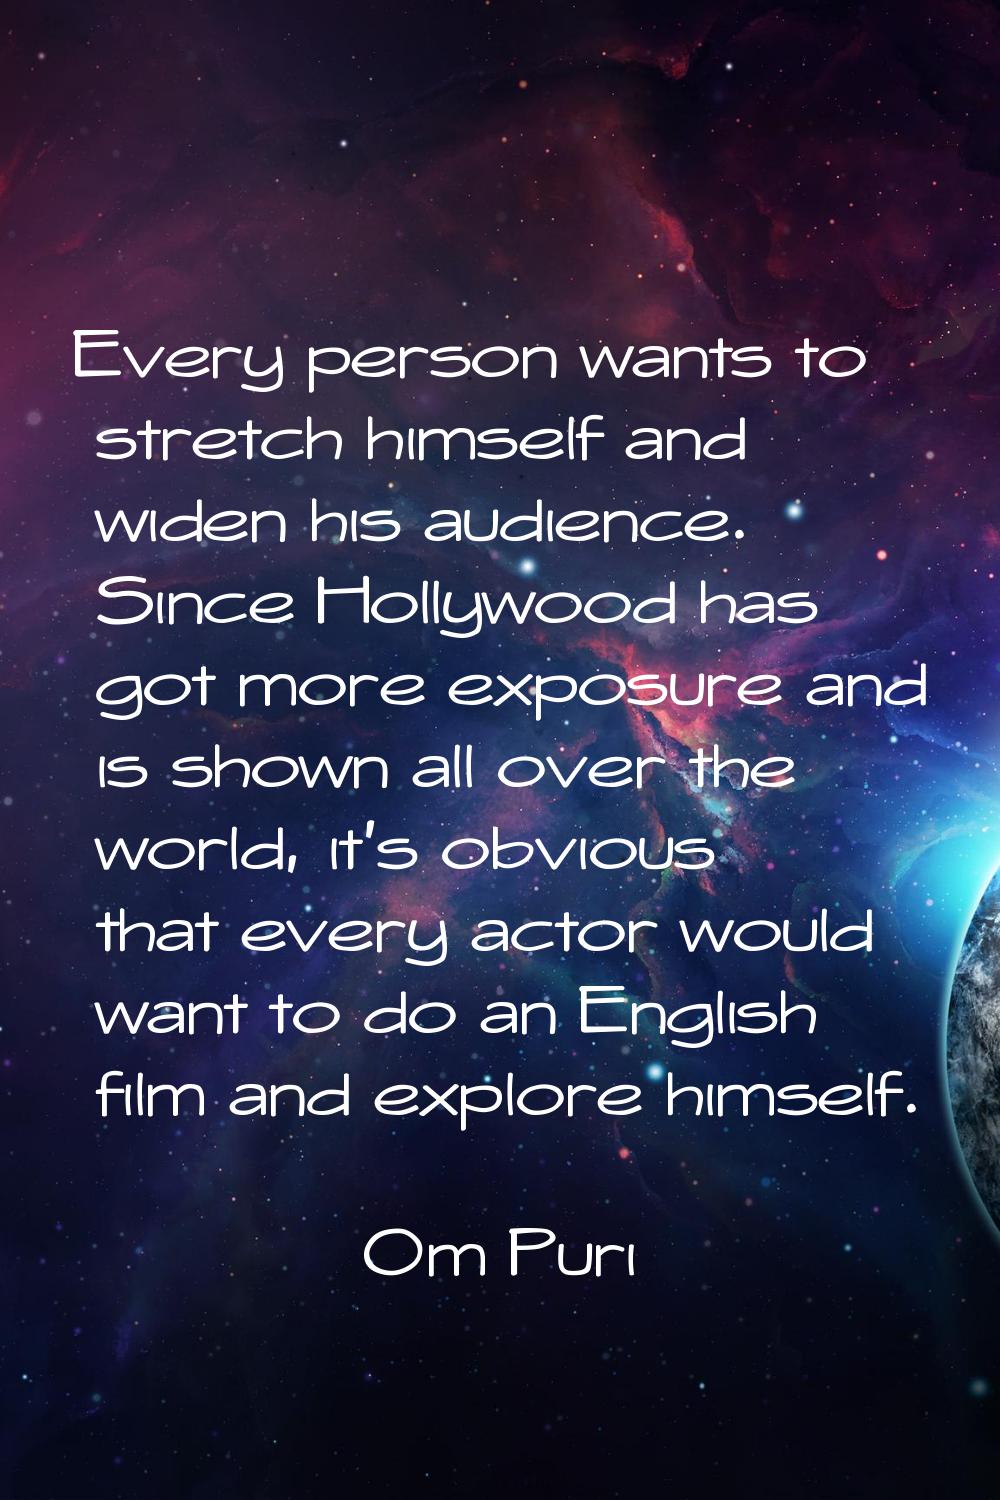 Every person wants to stretch himself and widen his audience. Since Hollywood has got more exposure